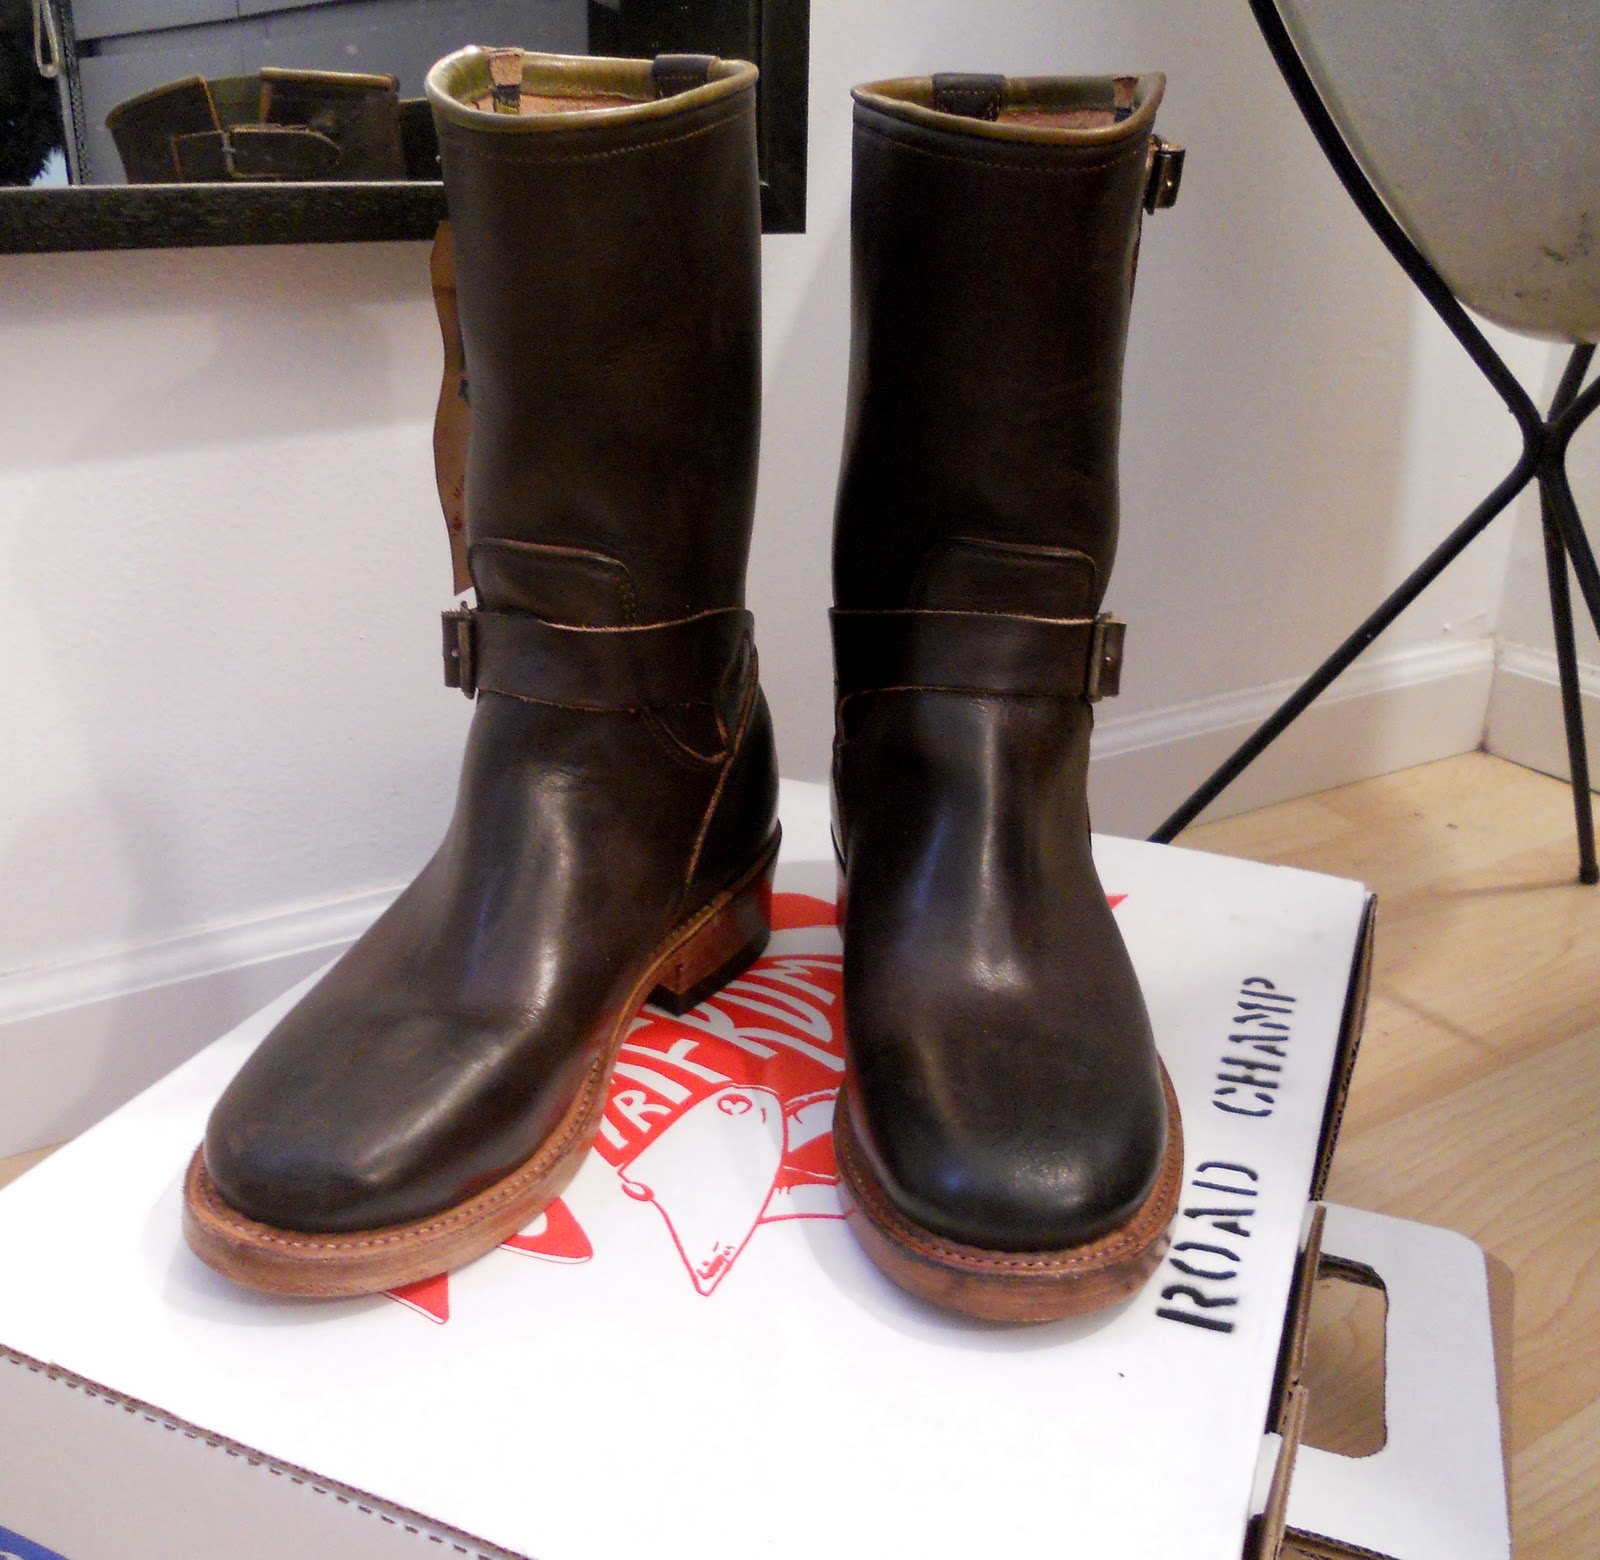 Vintage Engineer Boots: I FINALLY PICKED UP THE MISTER FREEDOM 